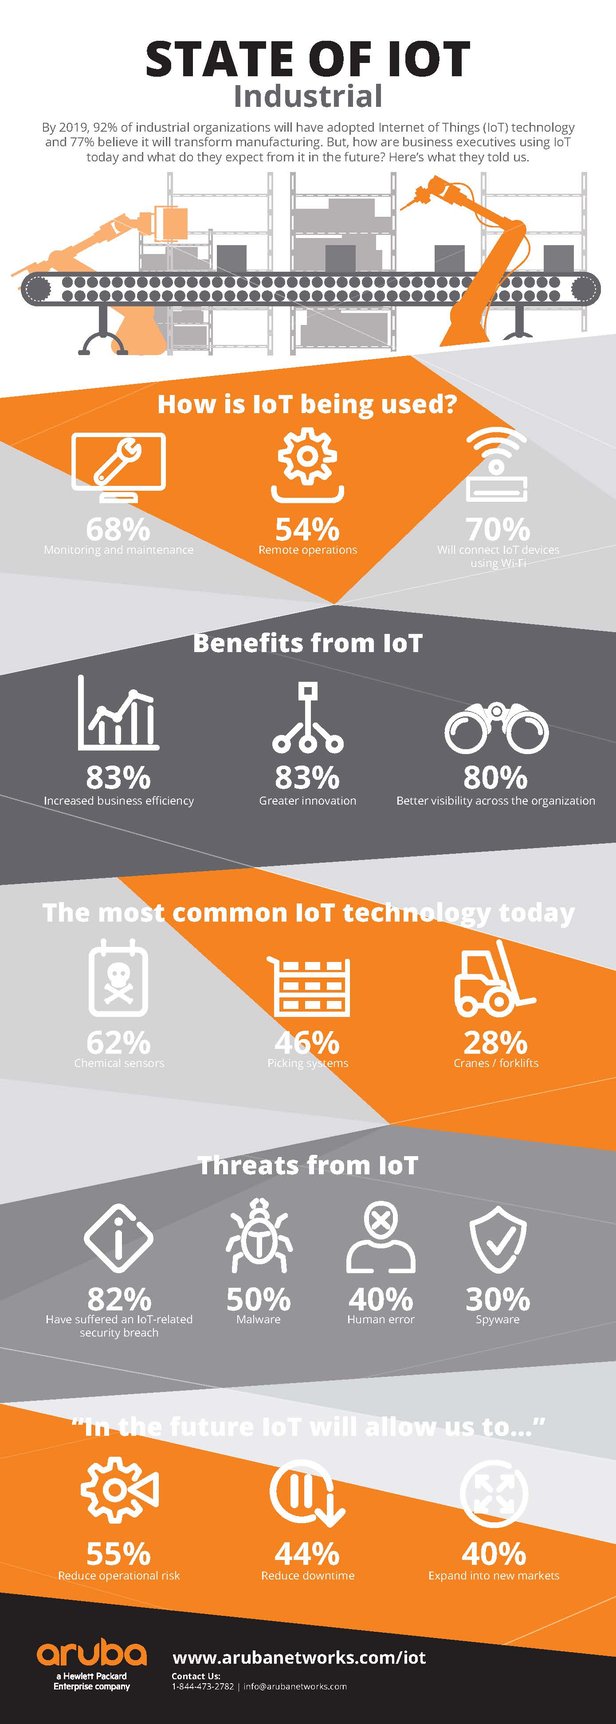 Industrial IoT Infographic from Aruba Networks.jpg